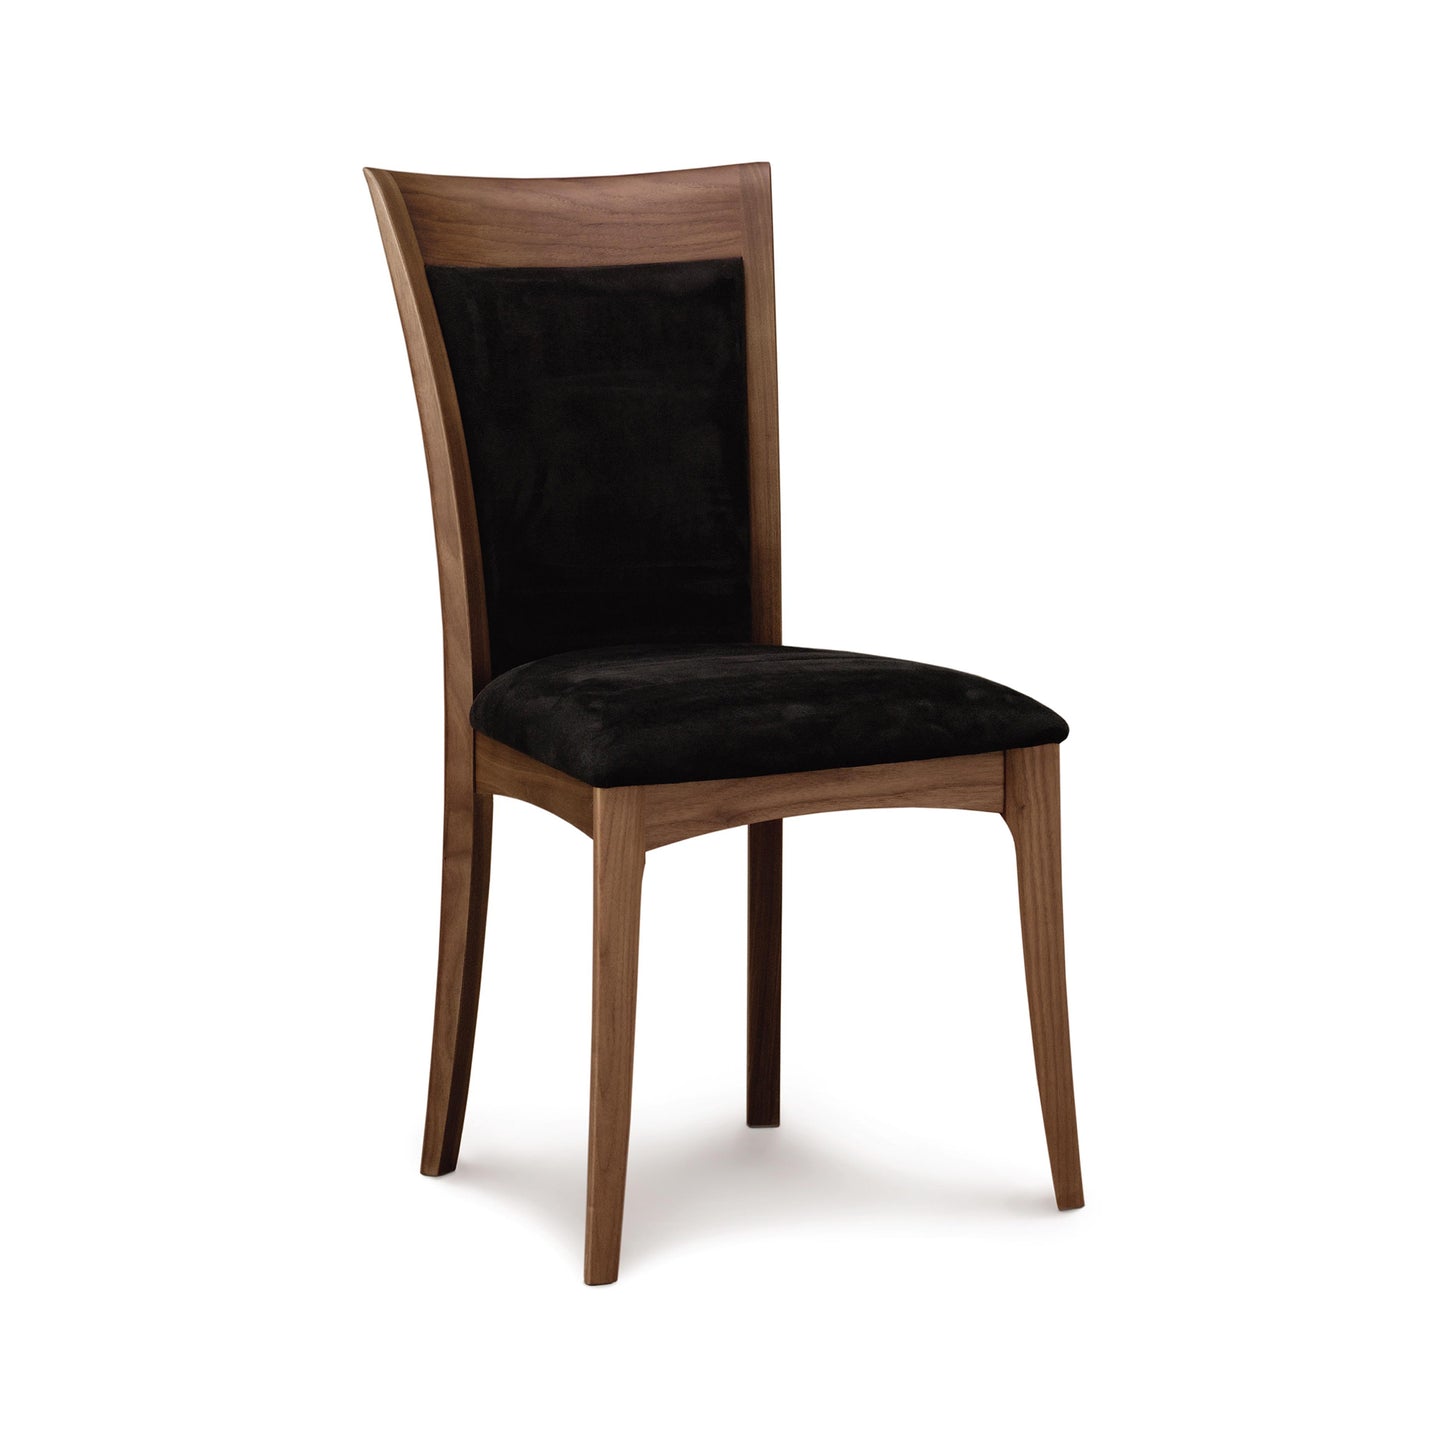 A Morgan Shaker Chair by Copeland Furniture with a curved backrest and a black upholstered seat against a white background.